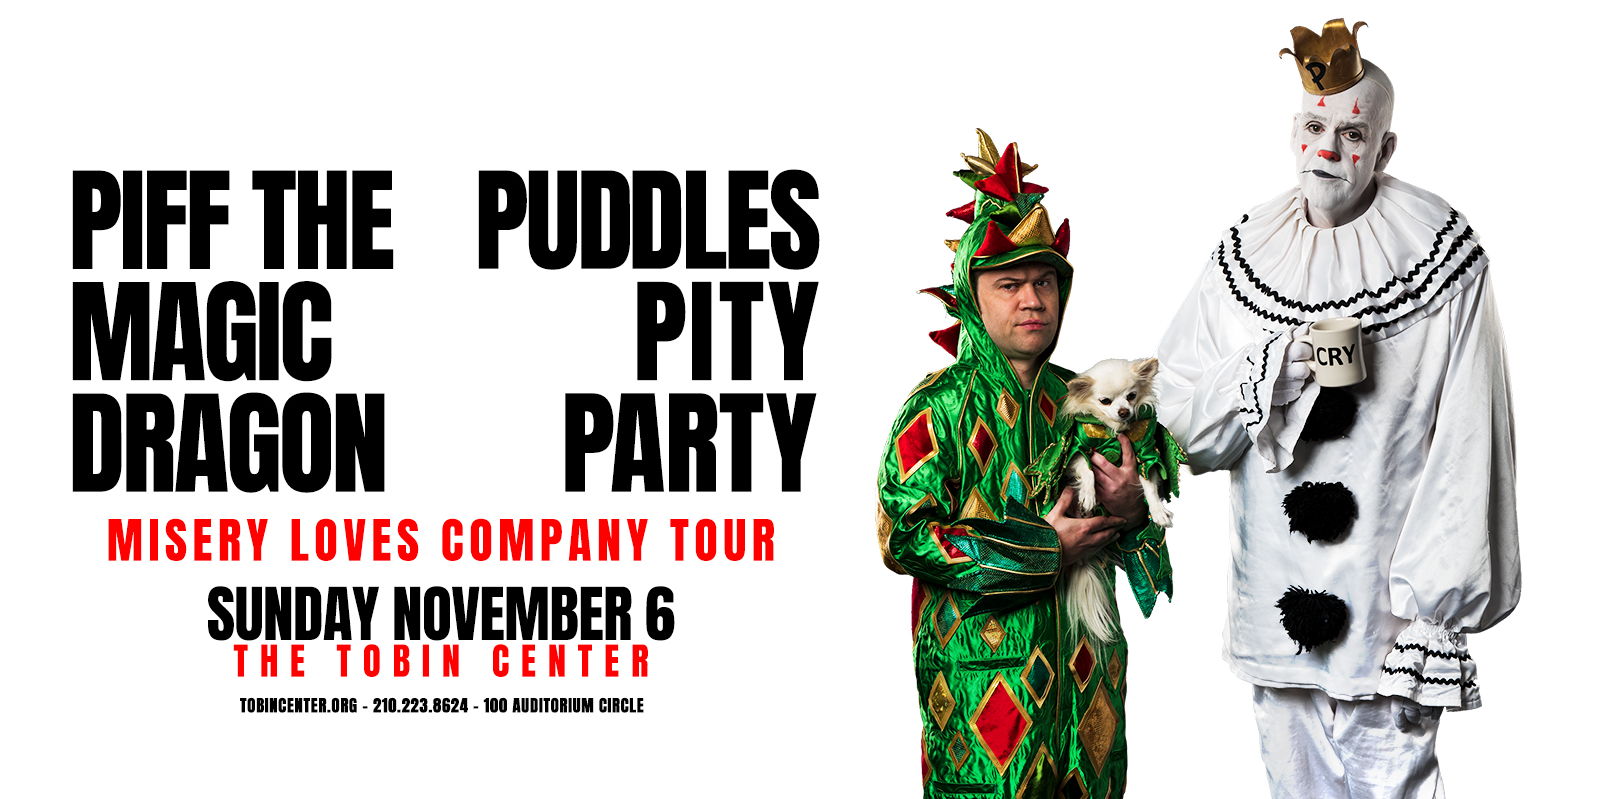 Piff The Magic Dragon & Puddles Pity Party promotional image